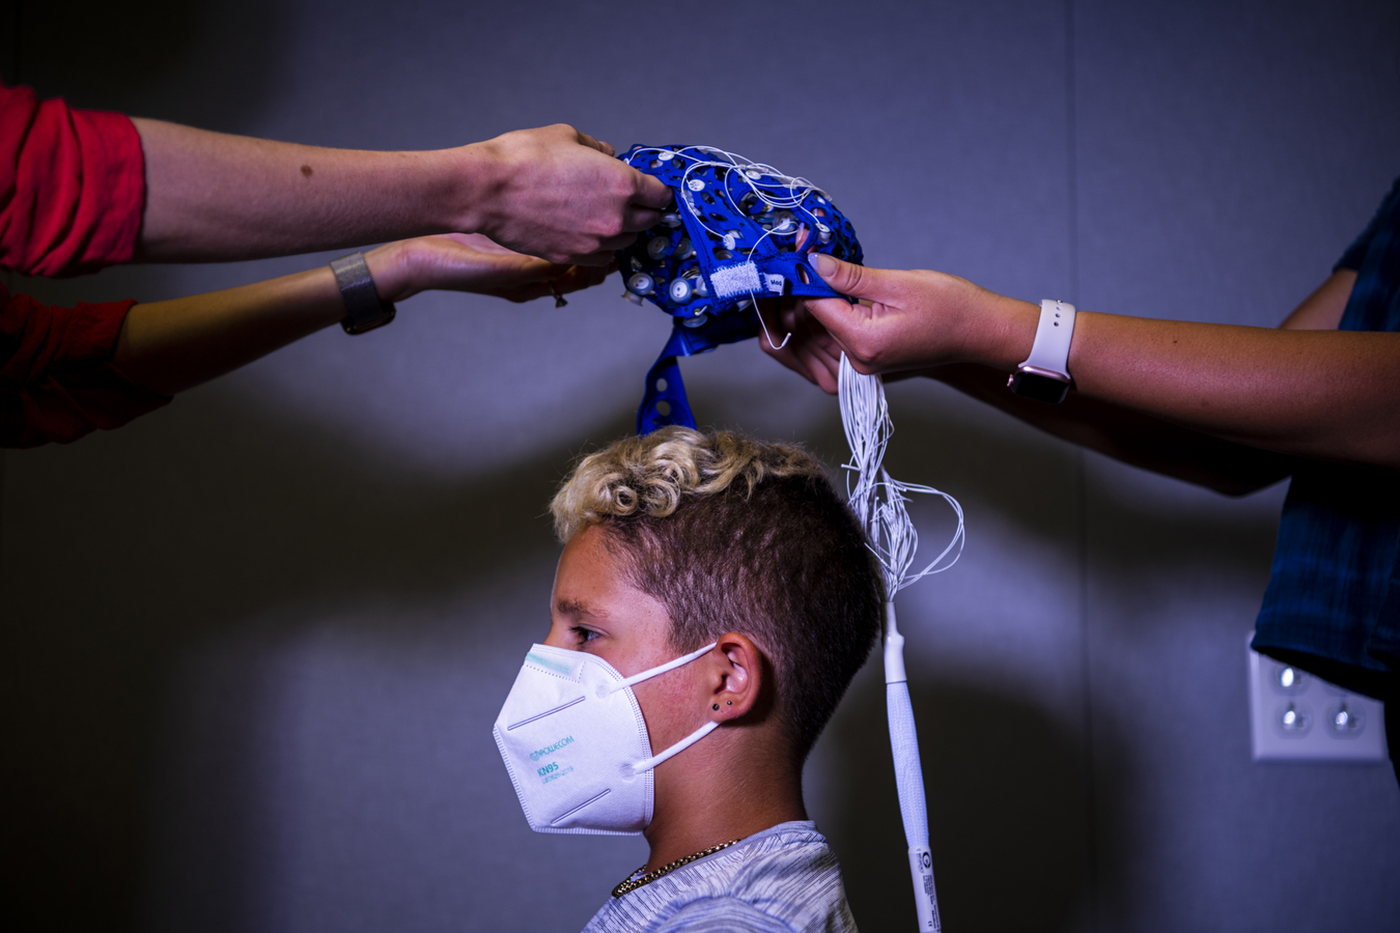 A study participant is pictured as two researchers lower a cap with sensors and wires onto their head